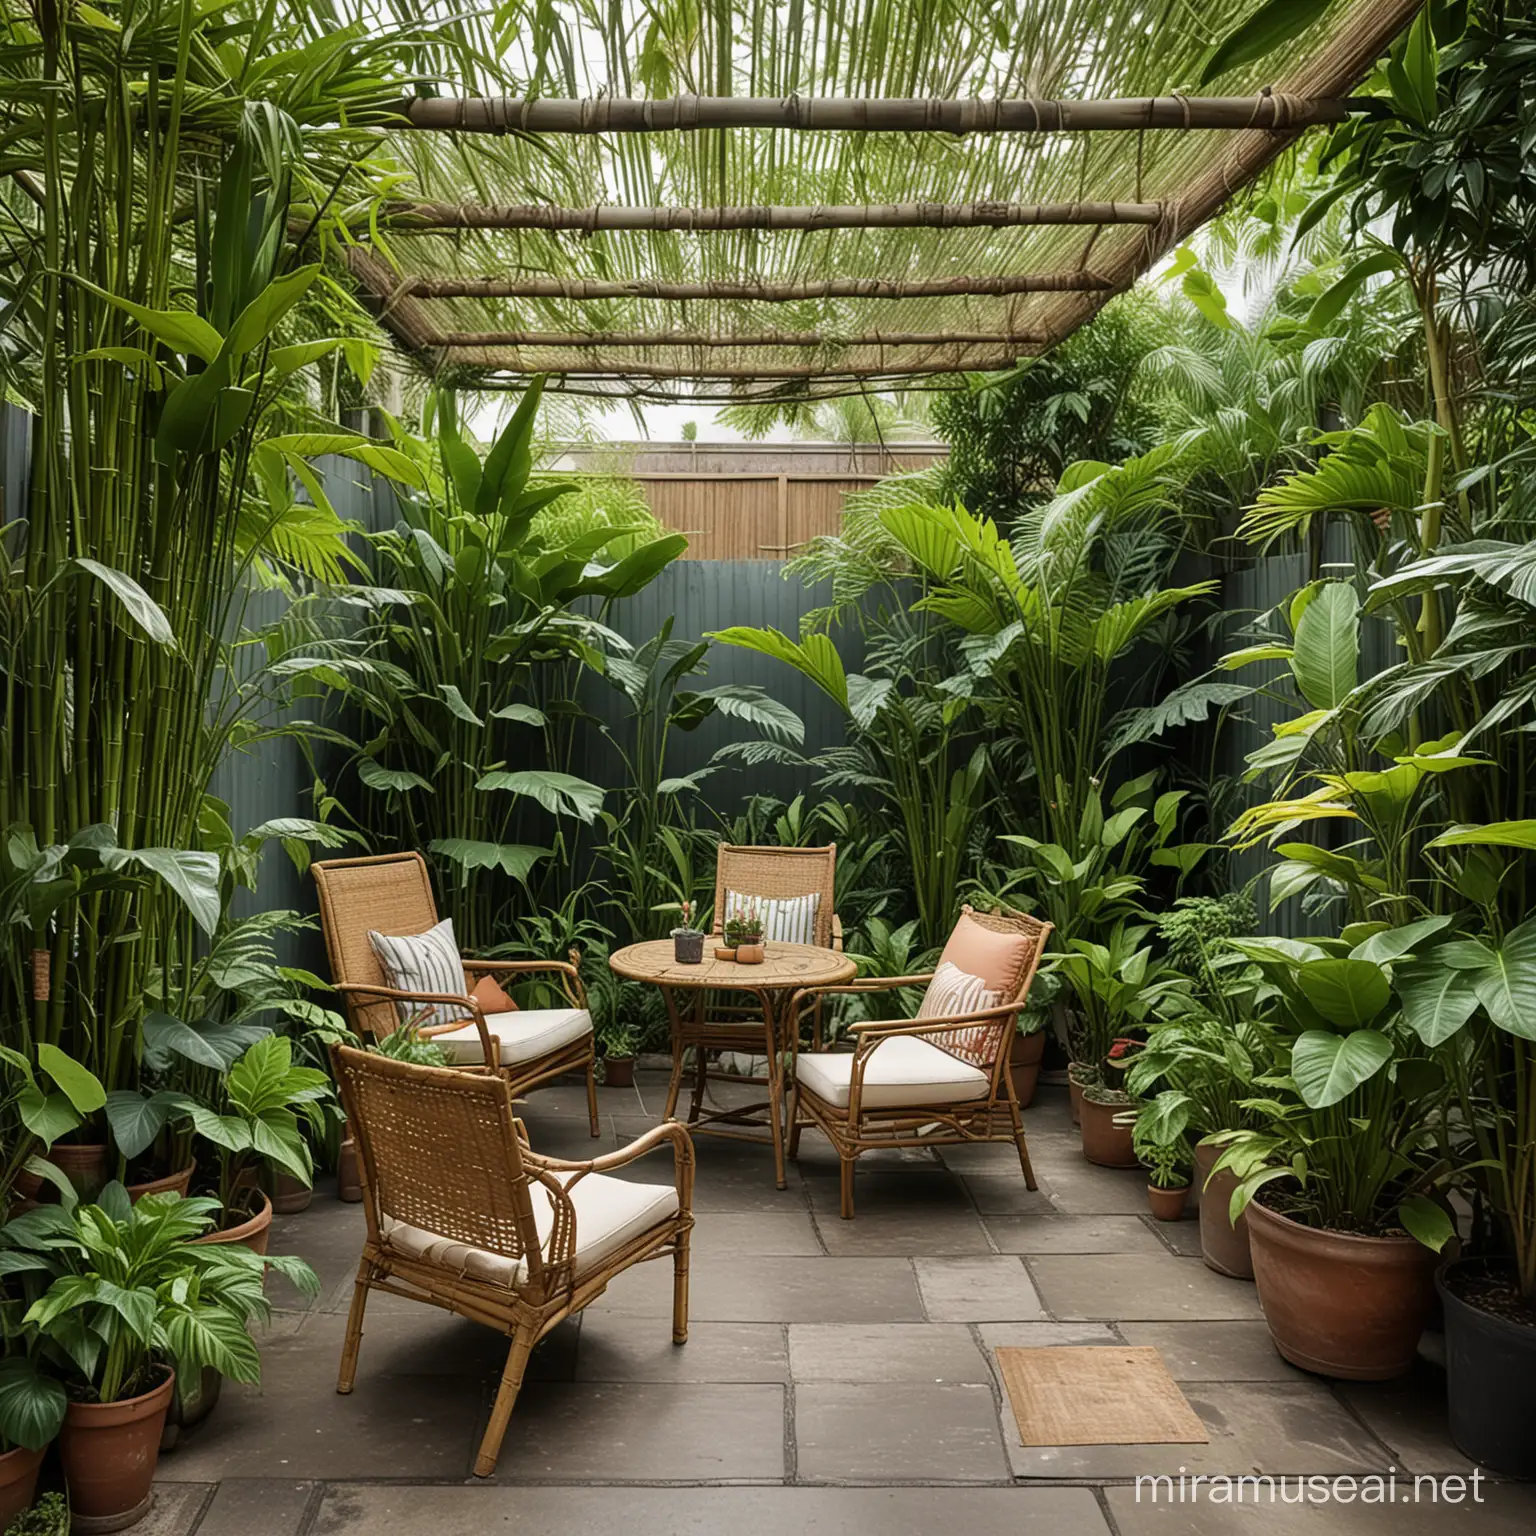 a small, lush rooftop garden with tropical plants, garden chairs, a table, the edges of the roof are circumvented by a bamboo fence